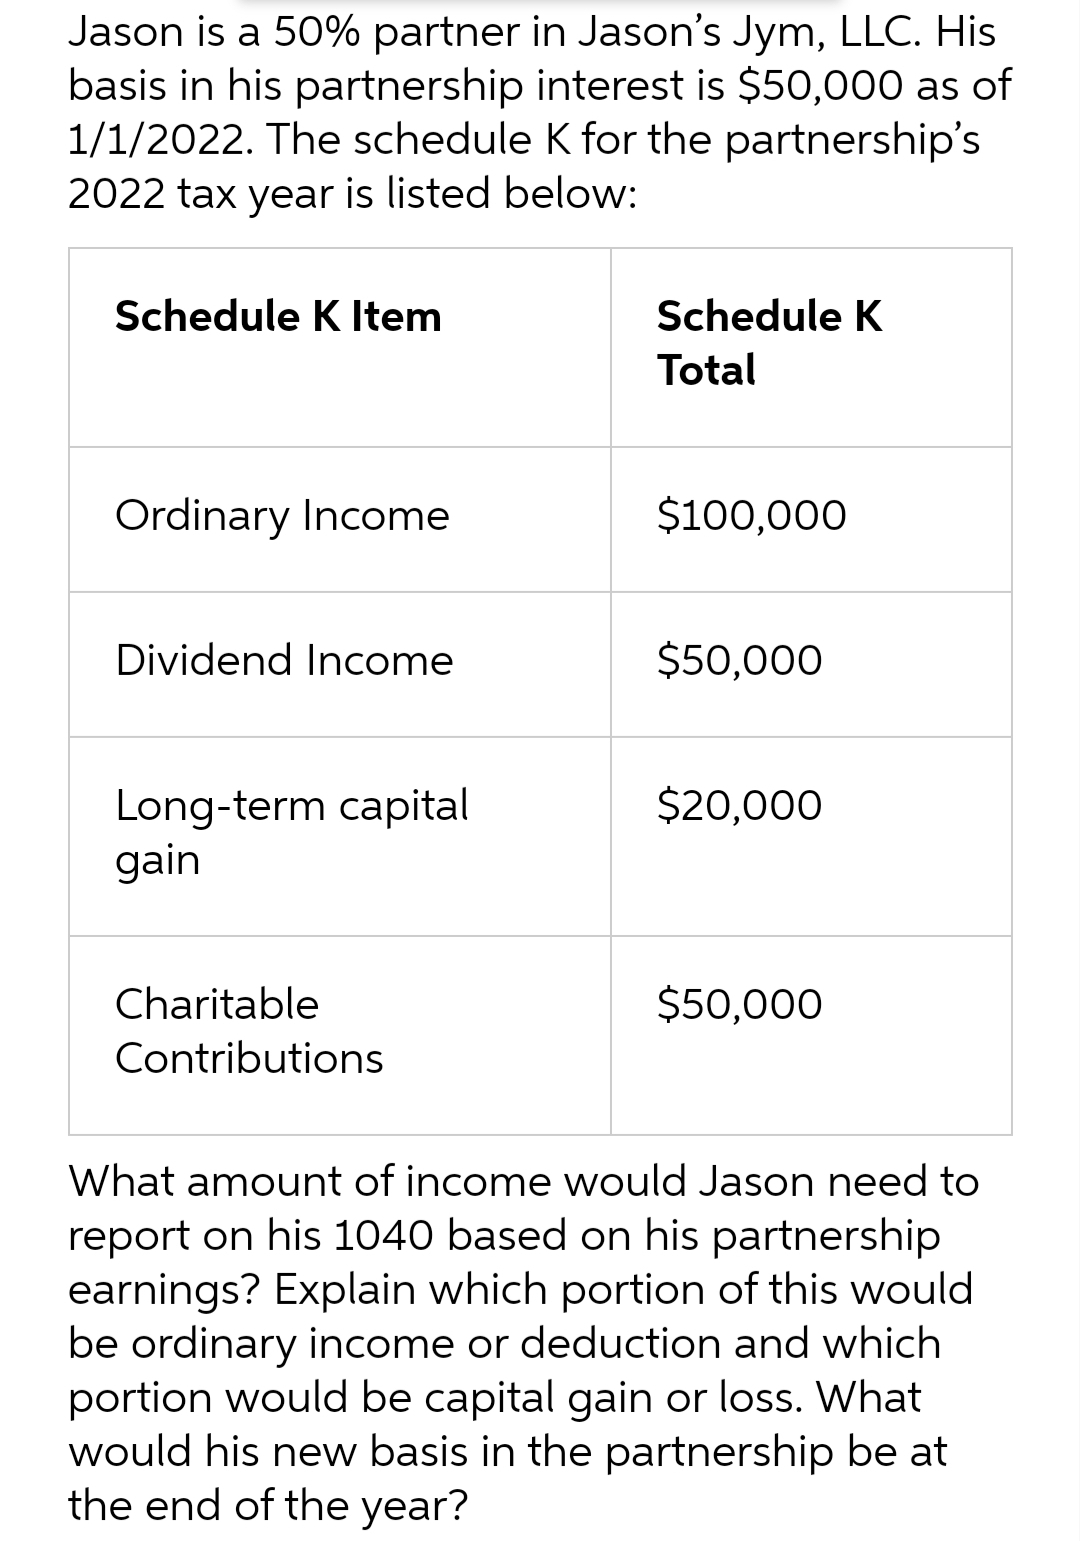 Jason is a 50% partner in Jason's Jym, LLC. His
basis in his partnership interest is $50,000 as of
1/1/2022. The schedule K for the partnership's
2022 tax year is listed below:
Schedule K Item
Ordinary Income
Dividend Income
Long-term capital
gain
Charitable
Contributions
Schedule K
Total
$100,000
$50,000
$20,000
$50,000
What amount of income would Jason need to
report on his 1040 based on his partnership
earnings? Explain which portion of this would
be ordinary income or deduction and which
portion would be capital gain or loss. What
would his new basis in the partnership be at
the end of the year?